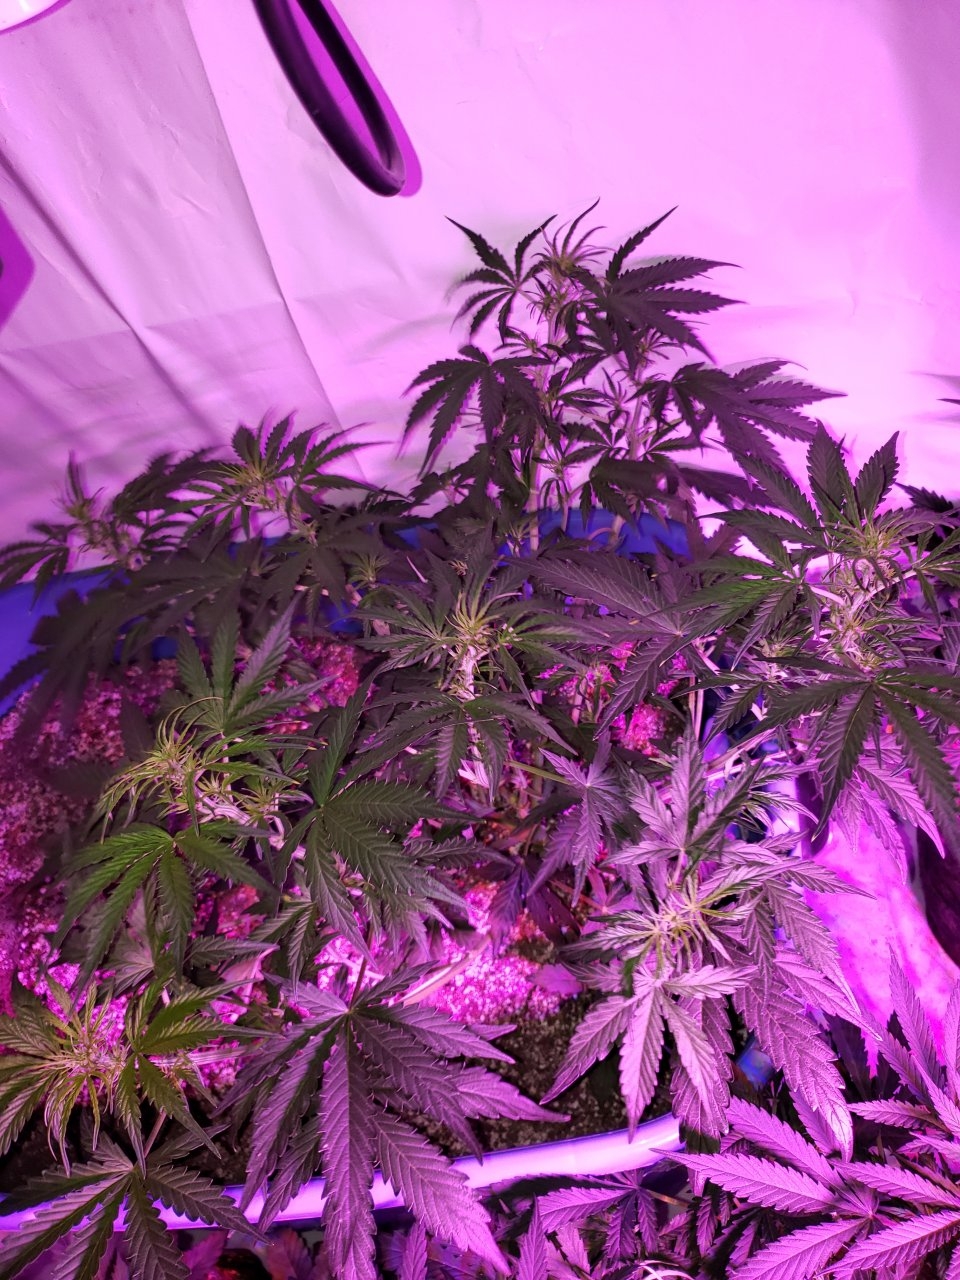 Pineapple Express Auto day 36